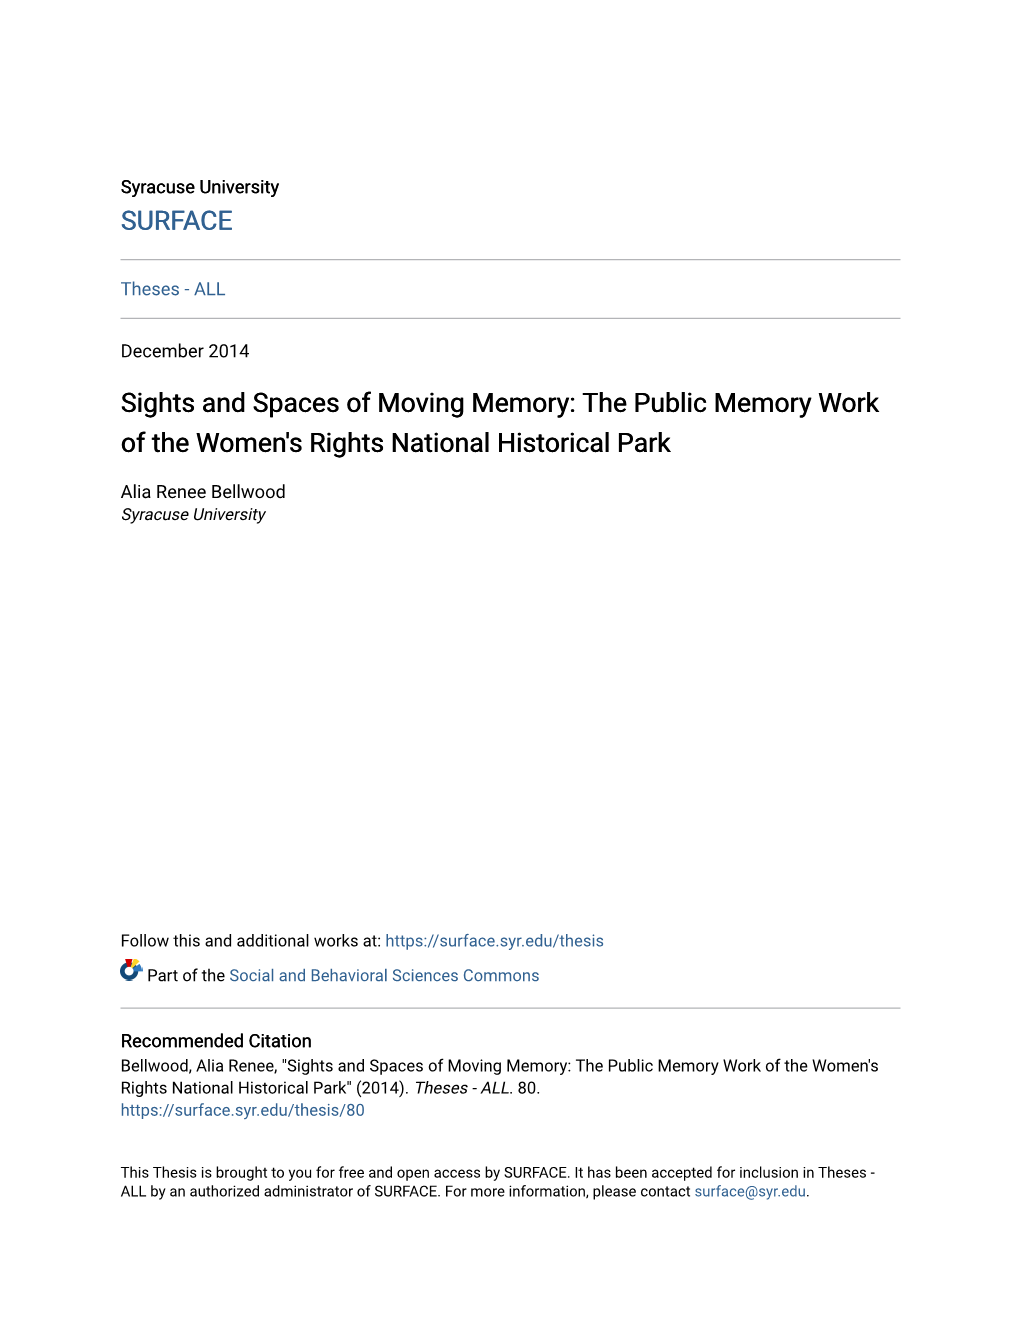 The Public Memory Work of the Women's Rights National Historical Park